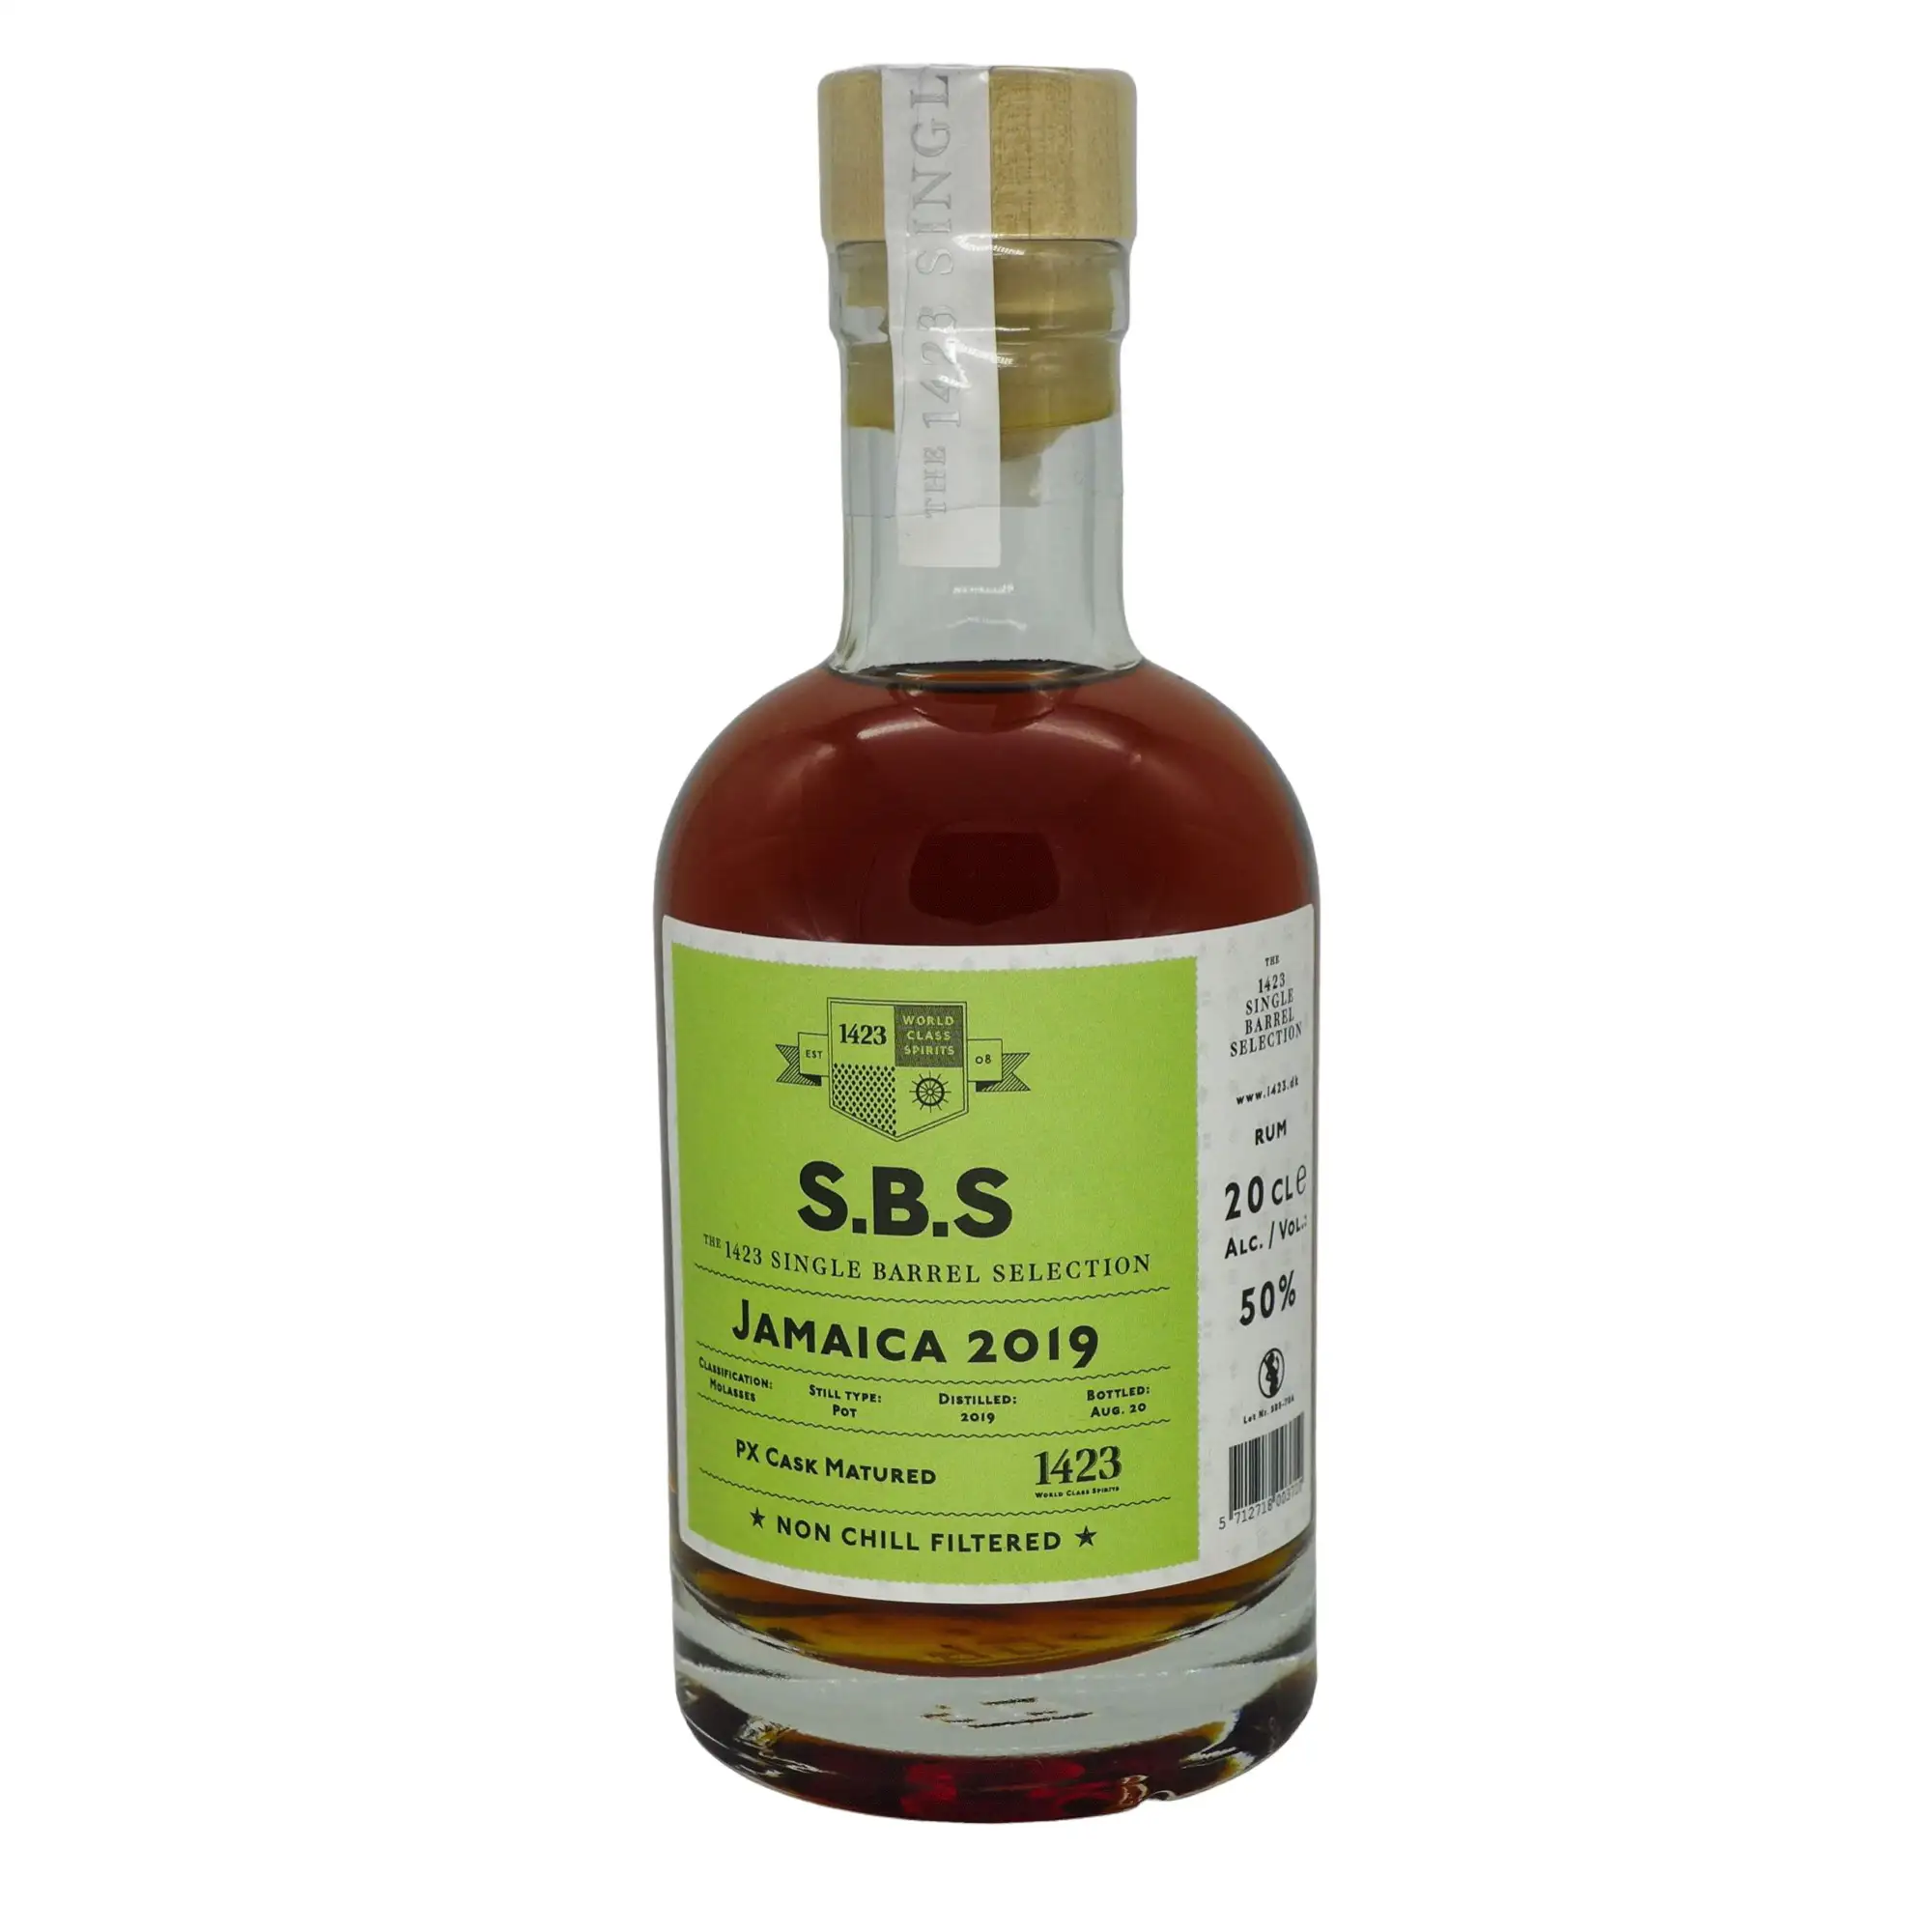 Image of the front of the bottle of the rum S.B.S Jamaica 2019 -  PX Cask Matured (DOK) DOK